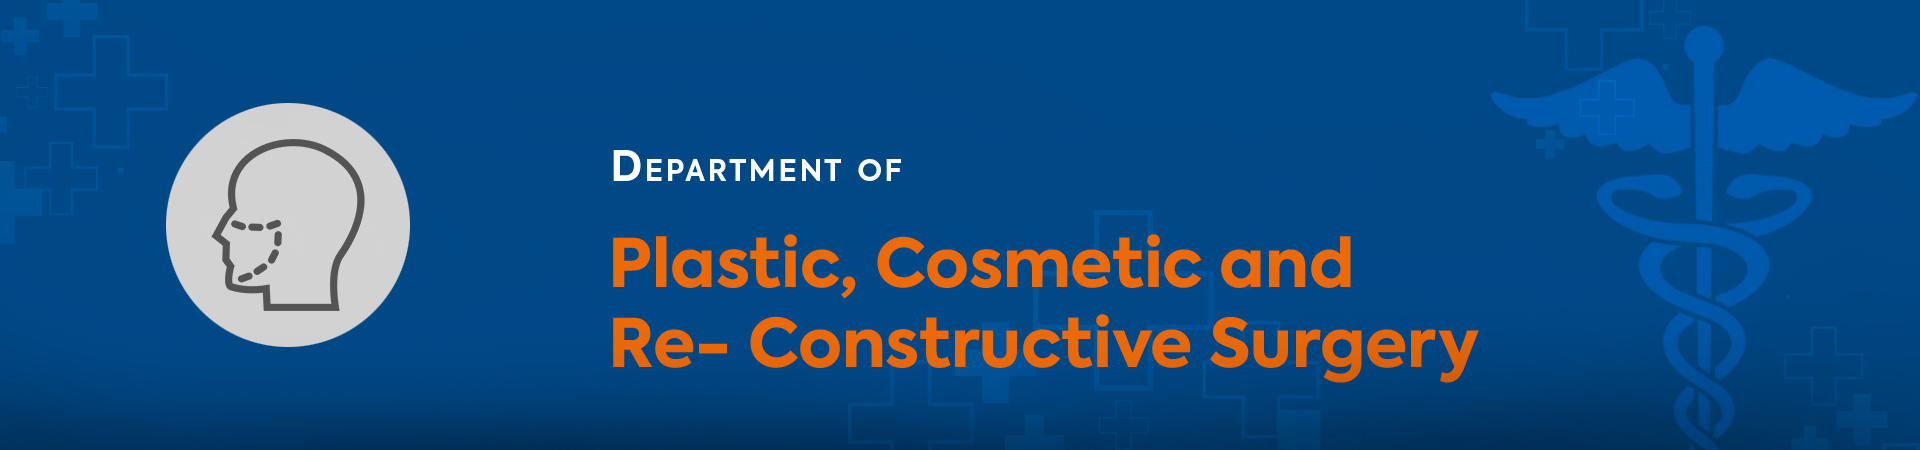 Plastic, Cosmetic and Re-Constructive Surgery